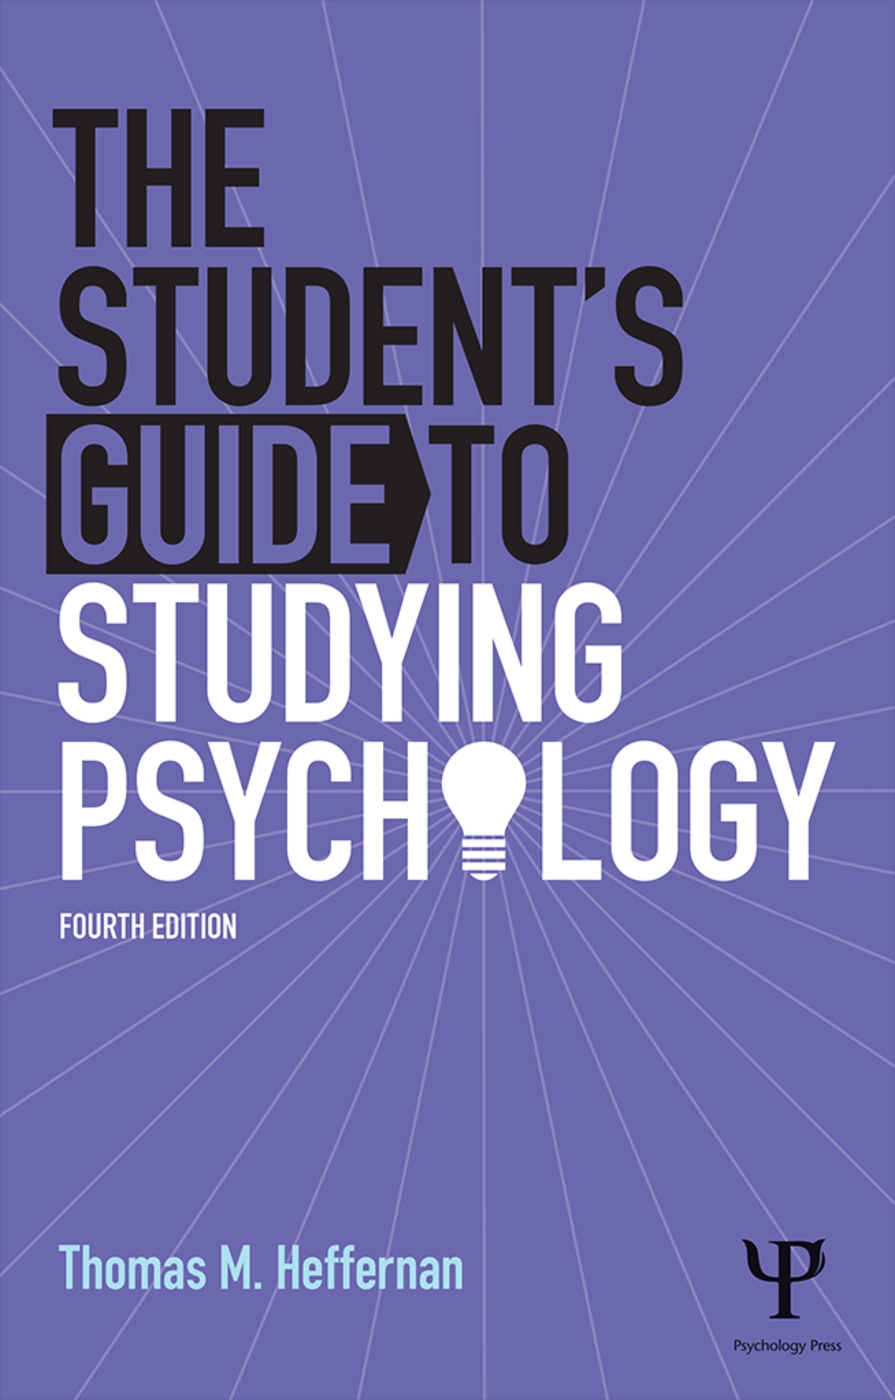 The Student’s Guide to Studying Psychology